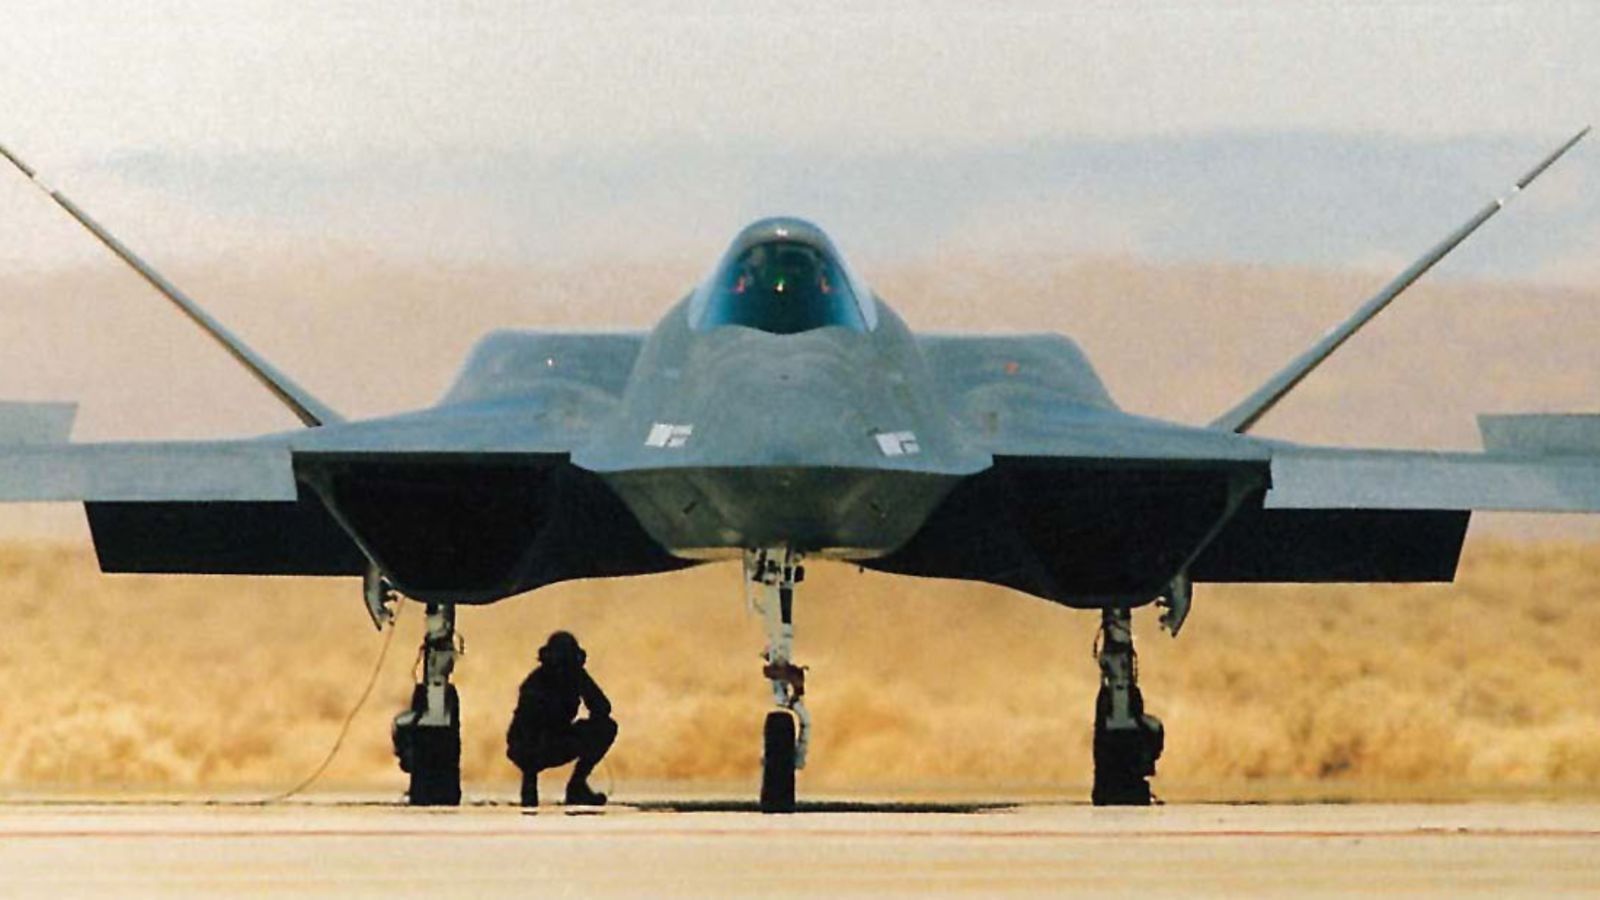 Forget The F 22: This Crazy Looking Plane Could Have Taken Its Place. The National Interest